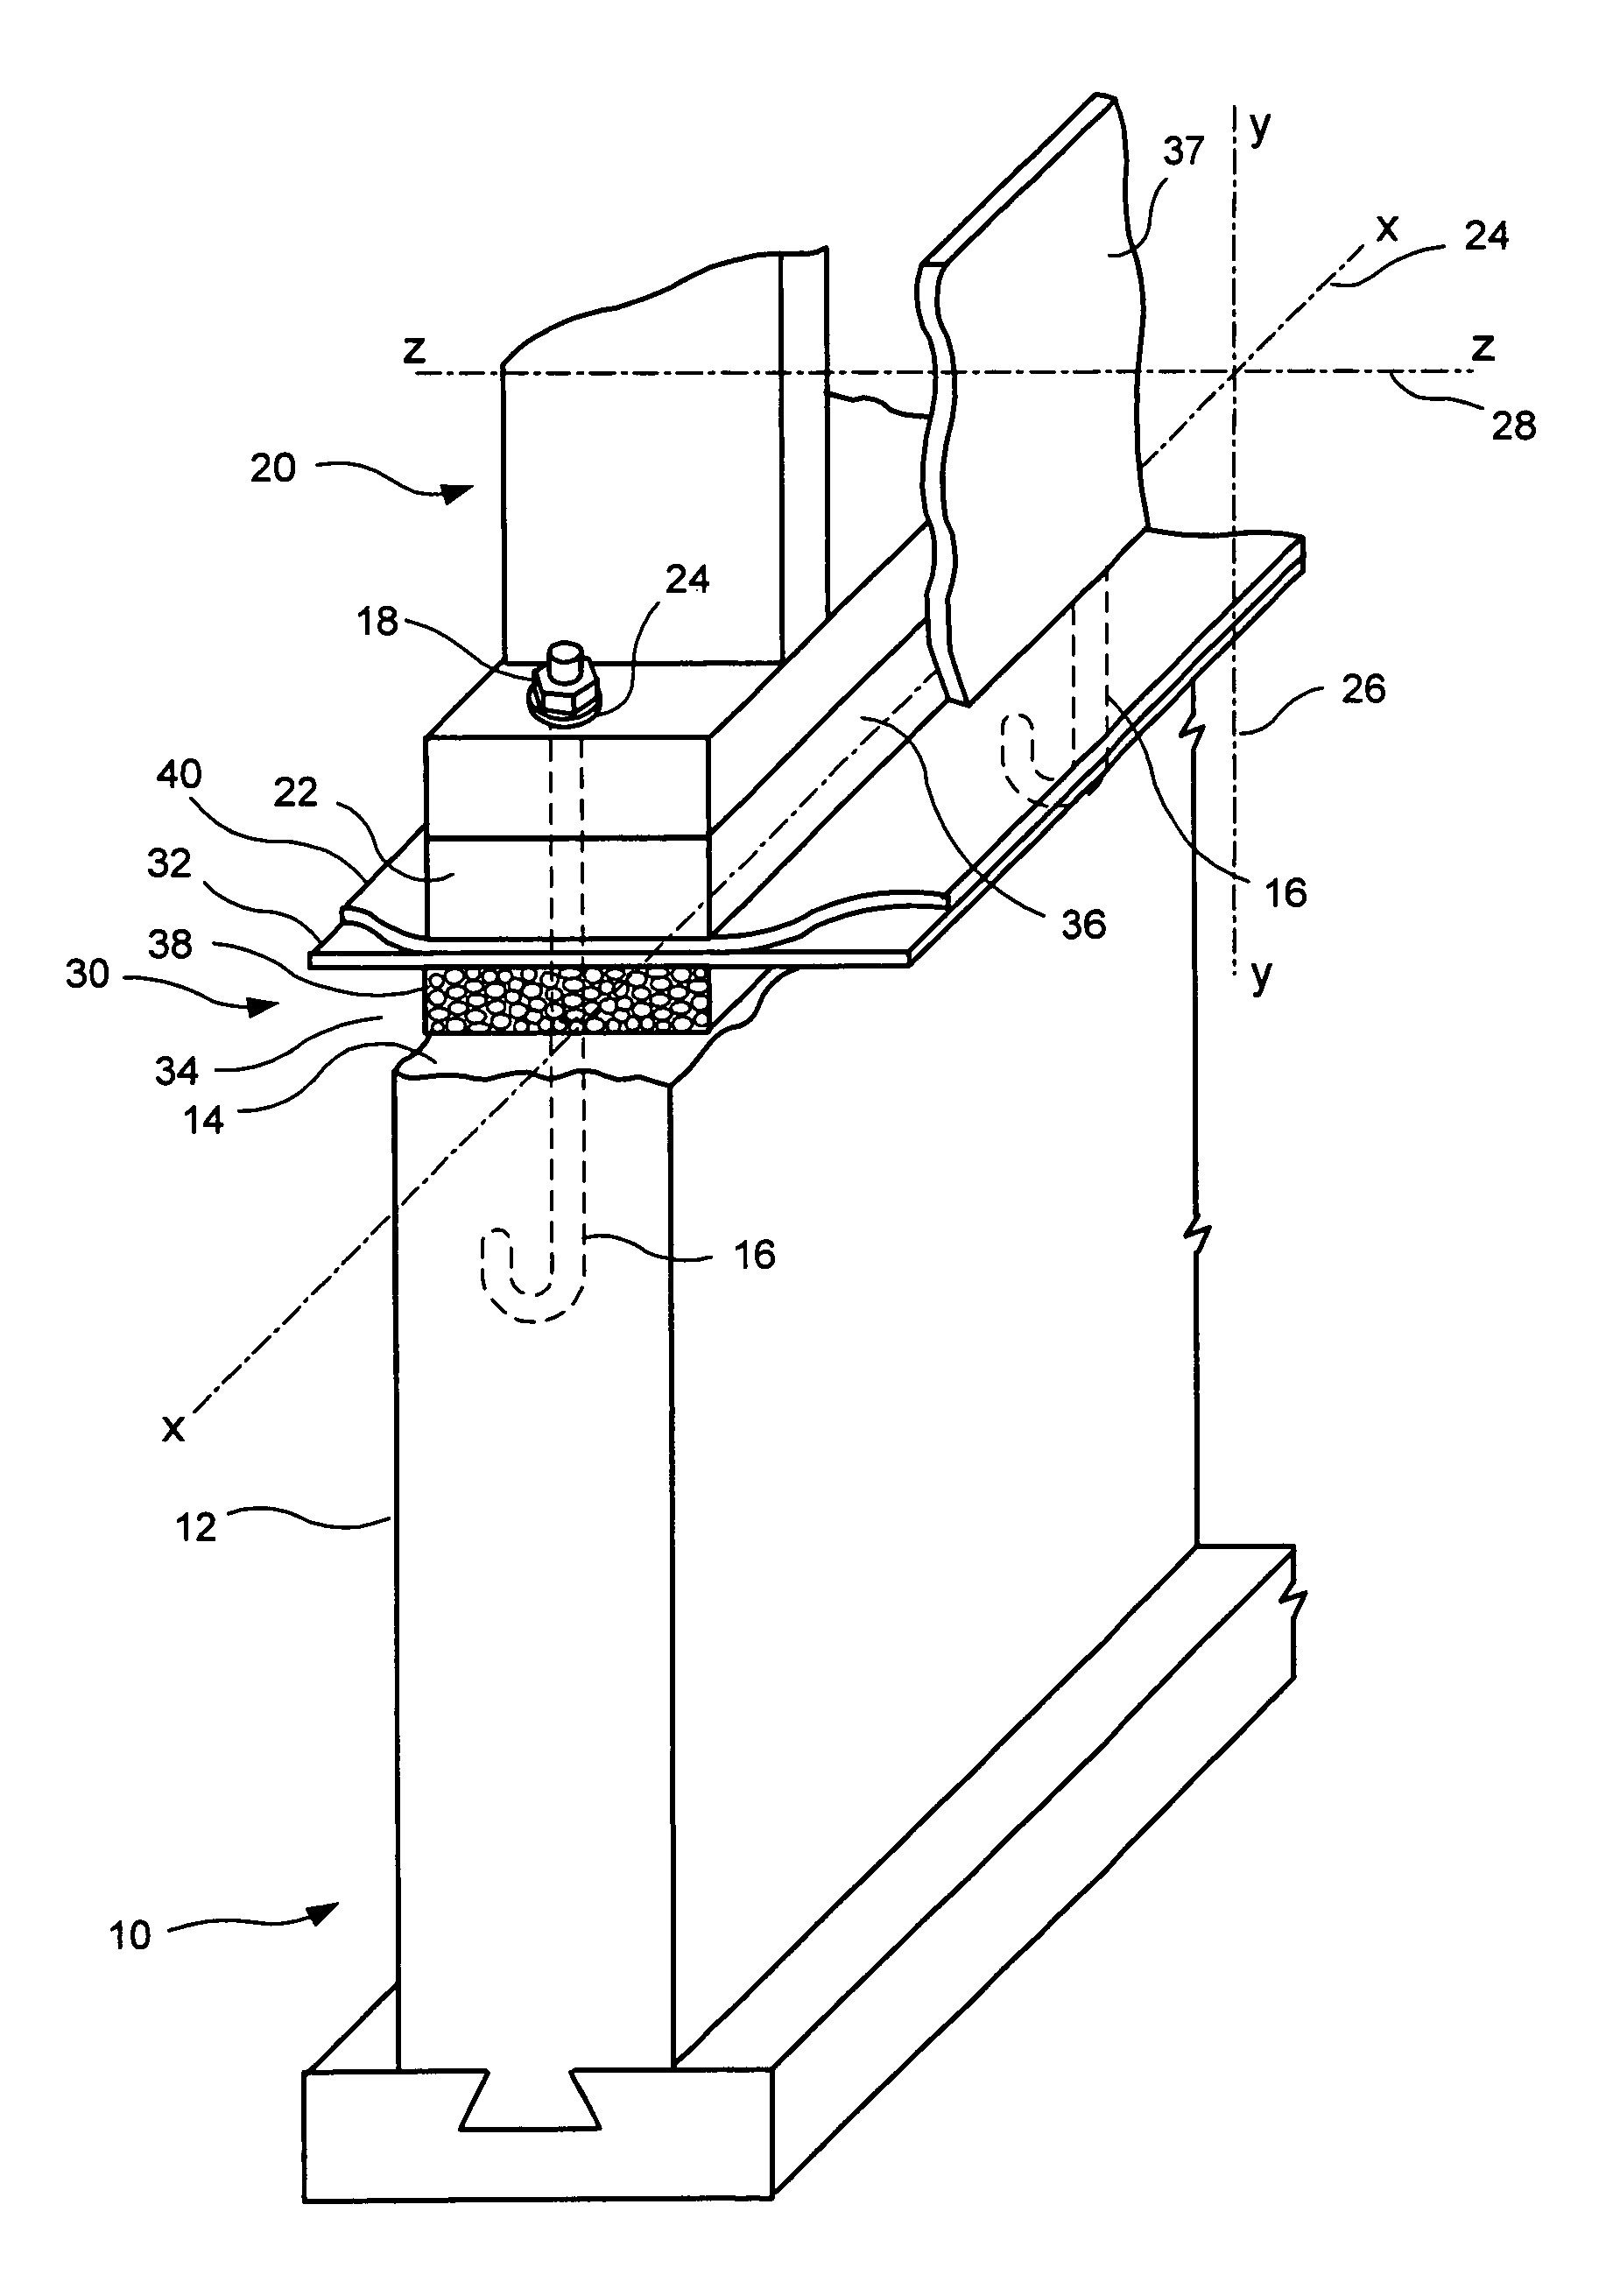 Combined sill seal and termite shield (SSTS)